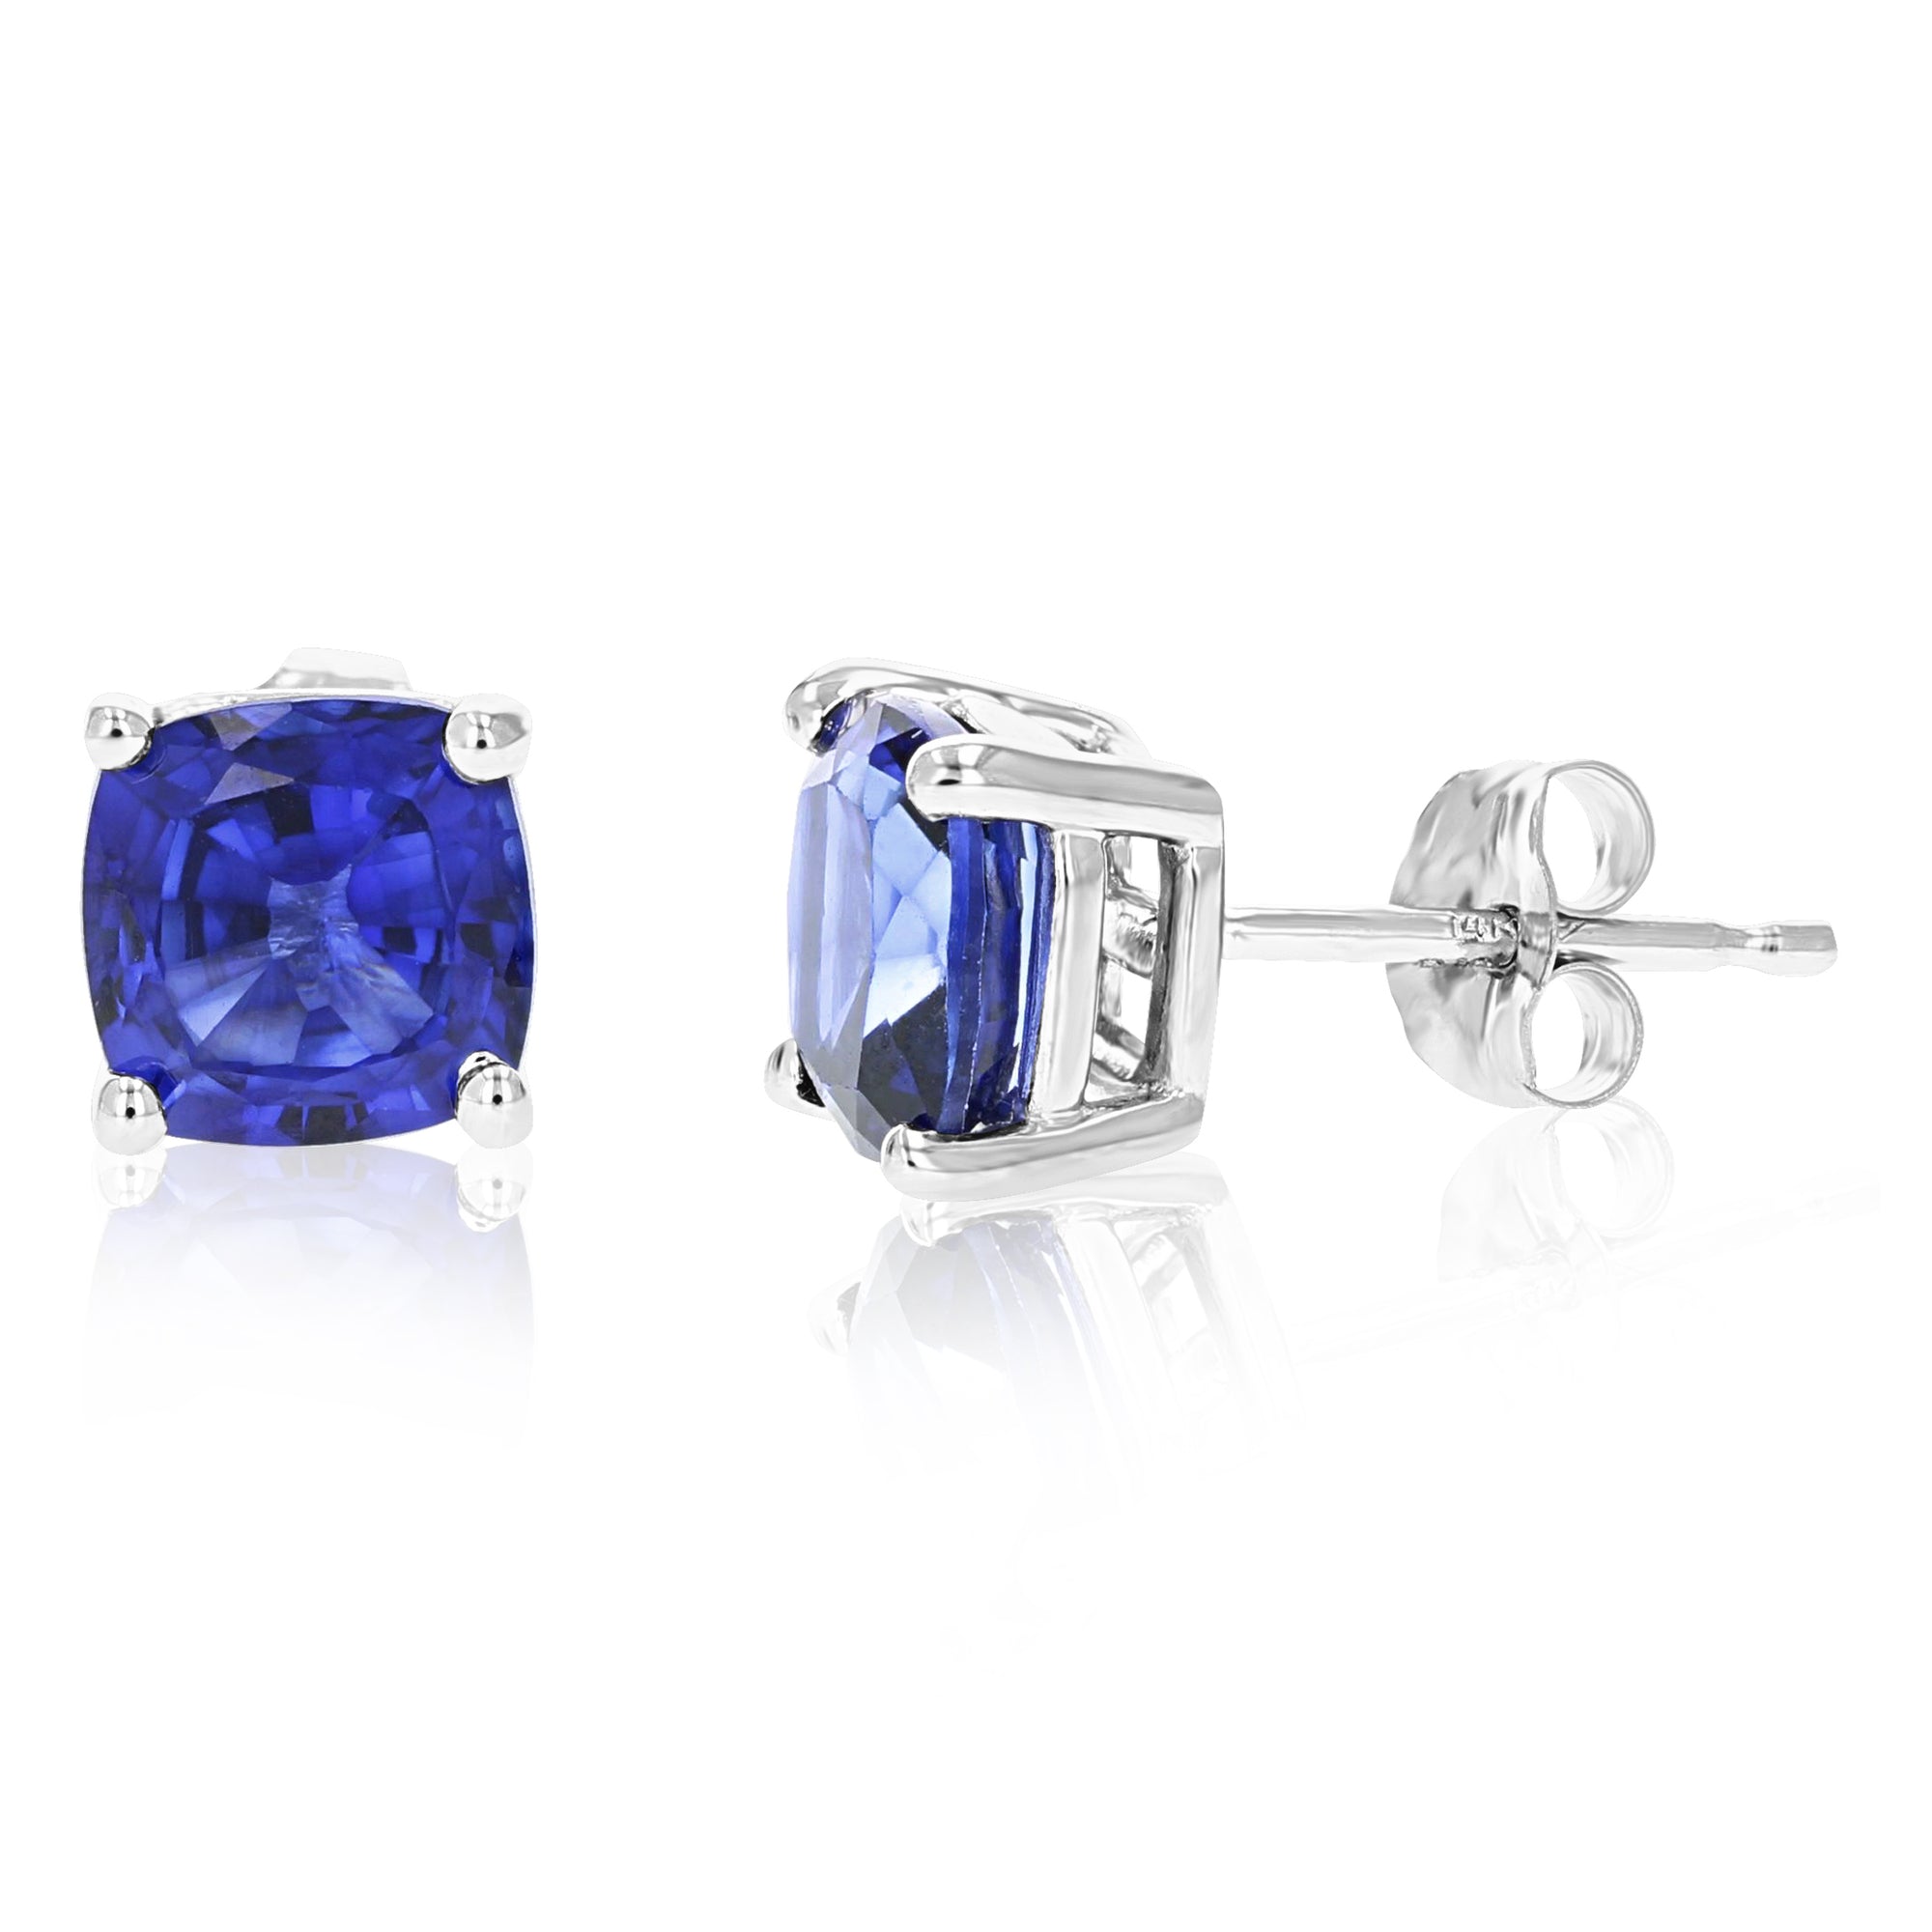 9ct white gold 5mm x 5mm round sapphire stud earrings - Jewellery from Mr  Harold and Son UK